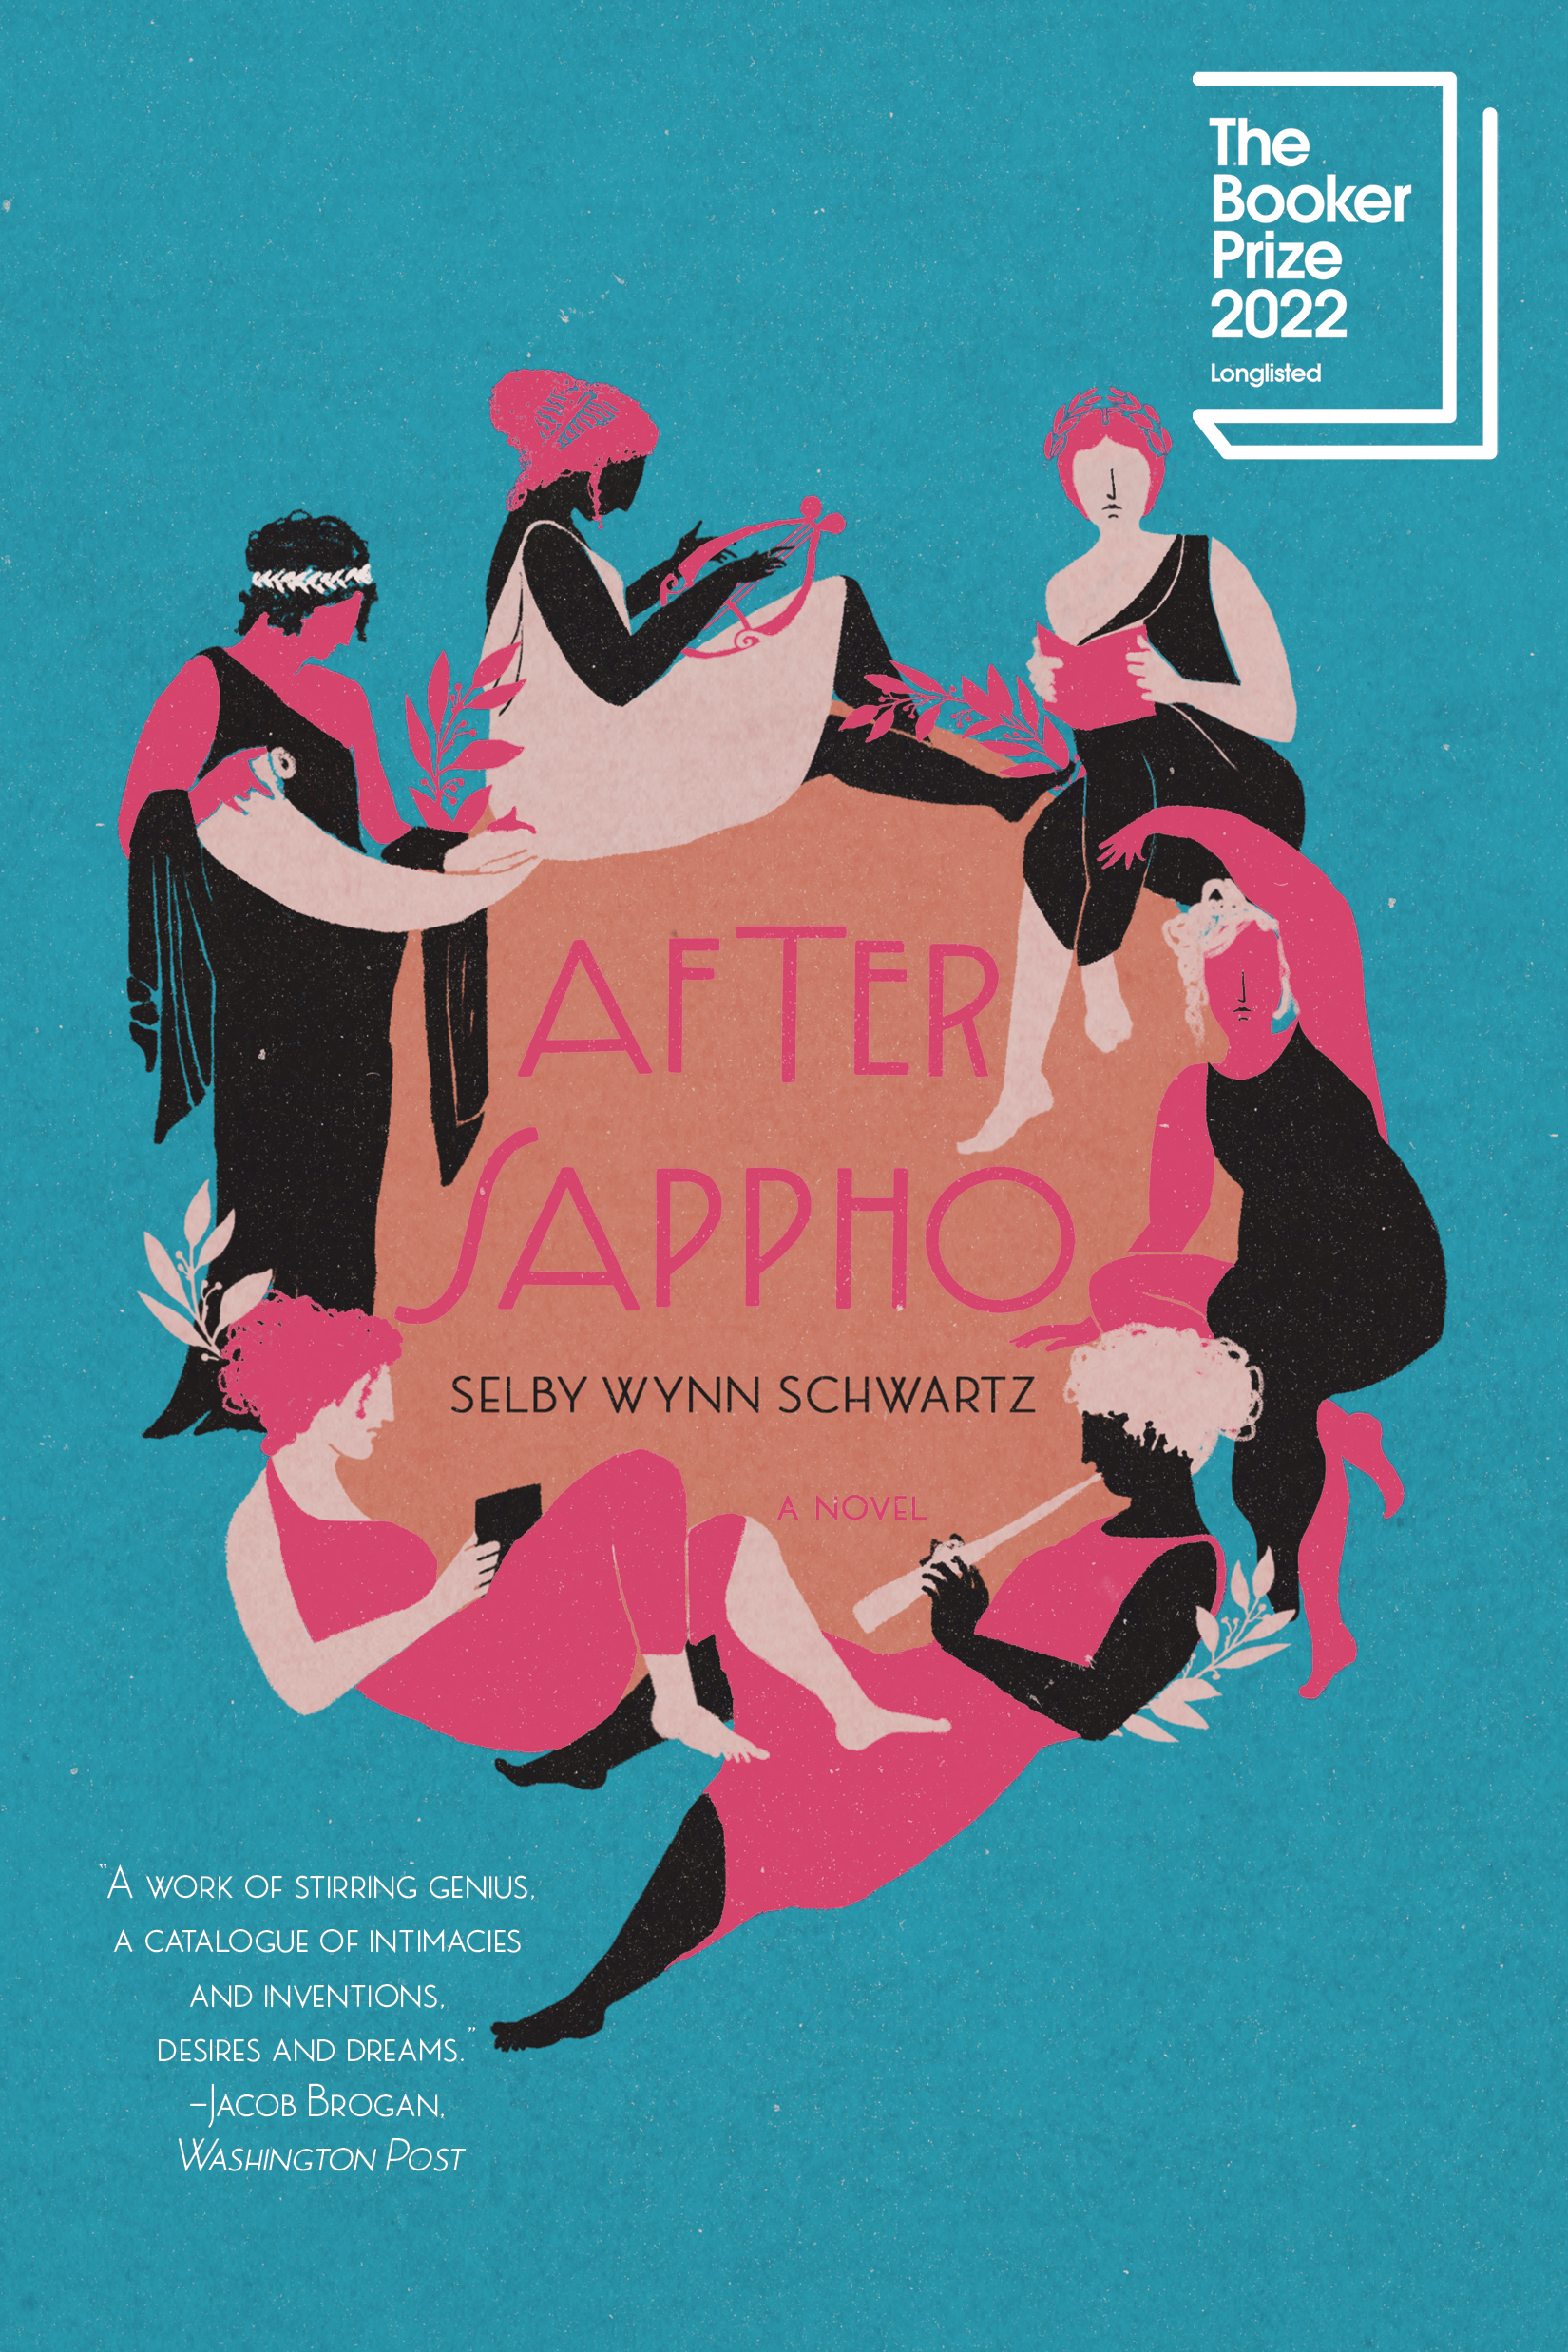 Illustrated book cover of After Sappho.